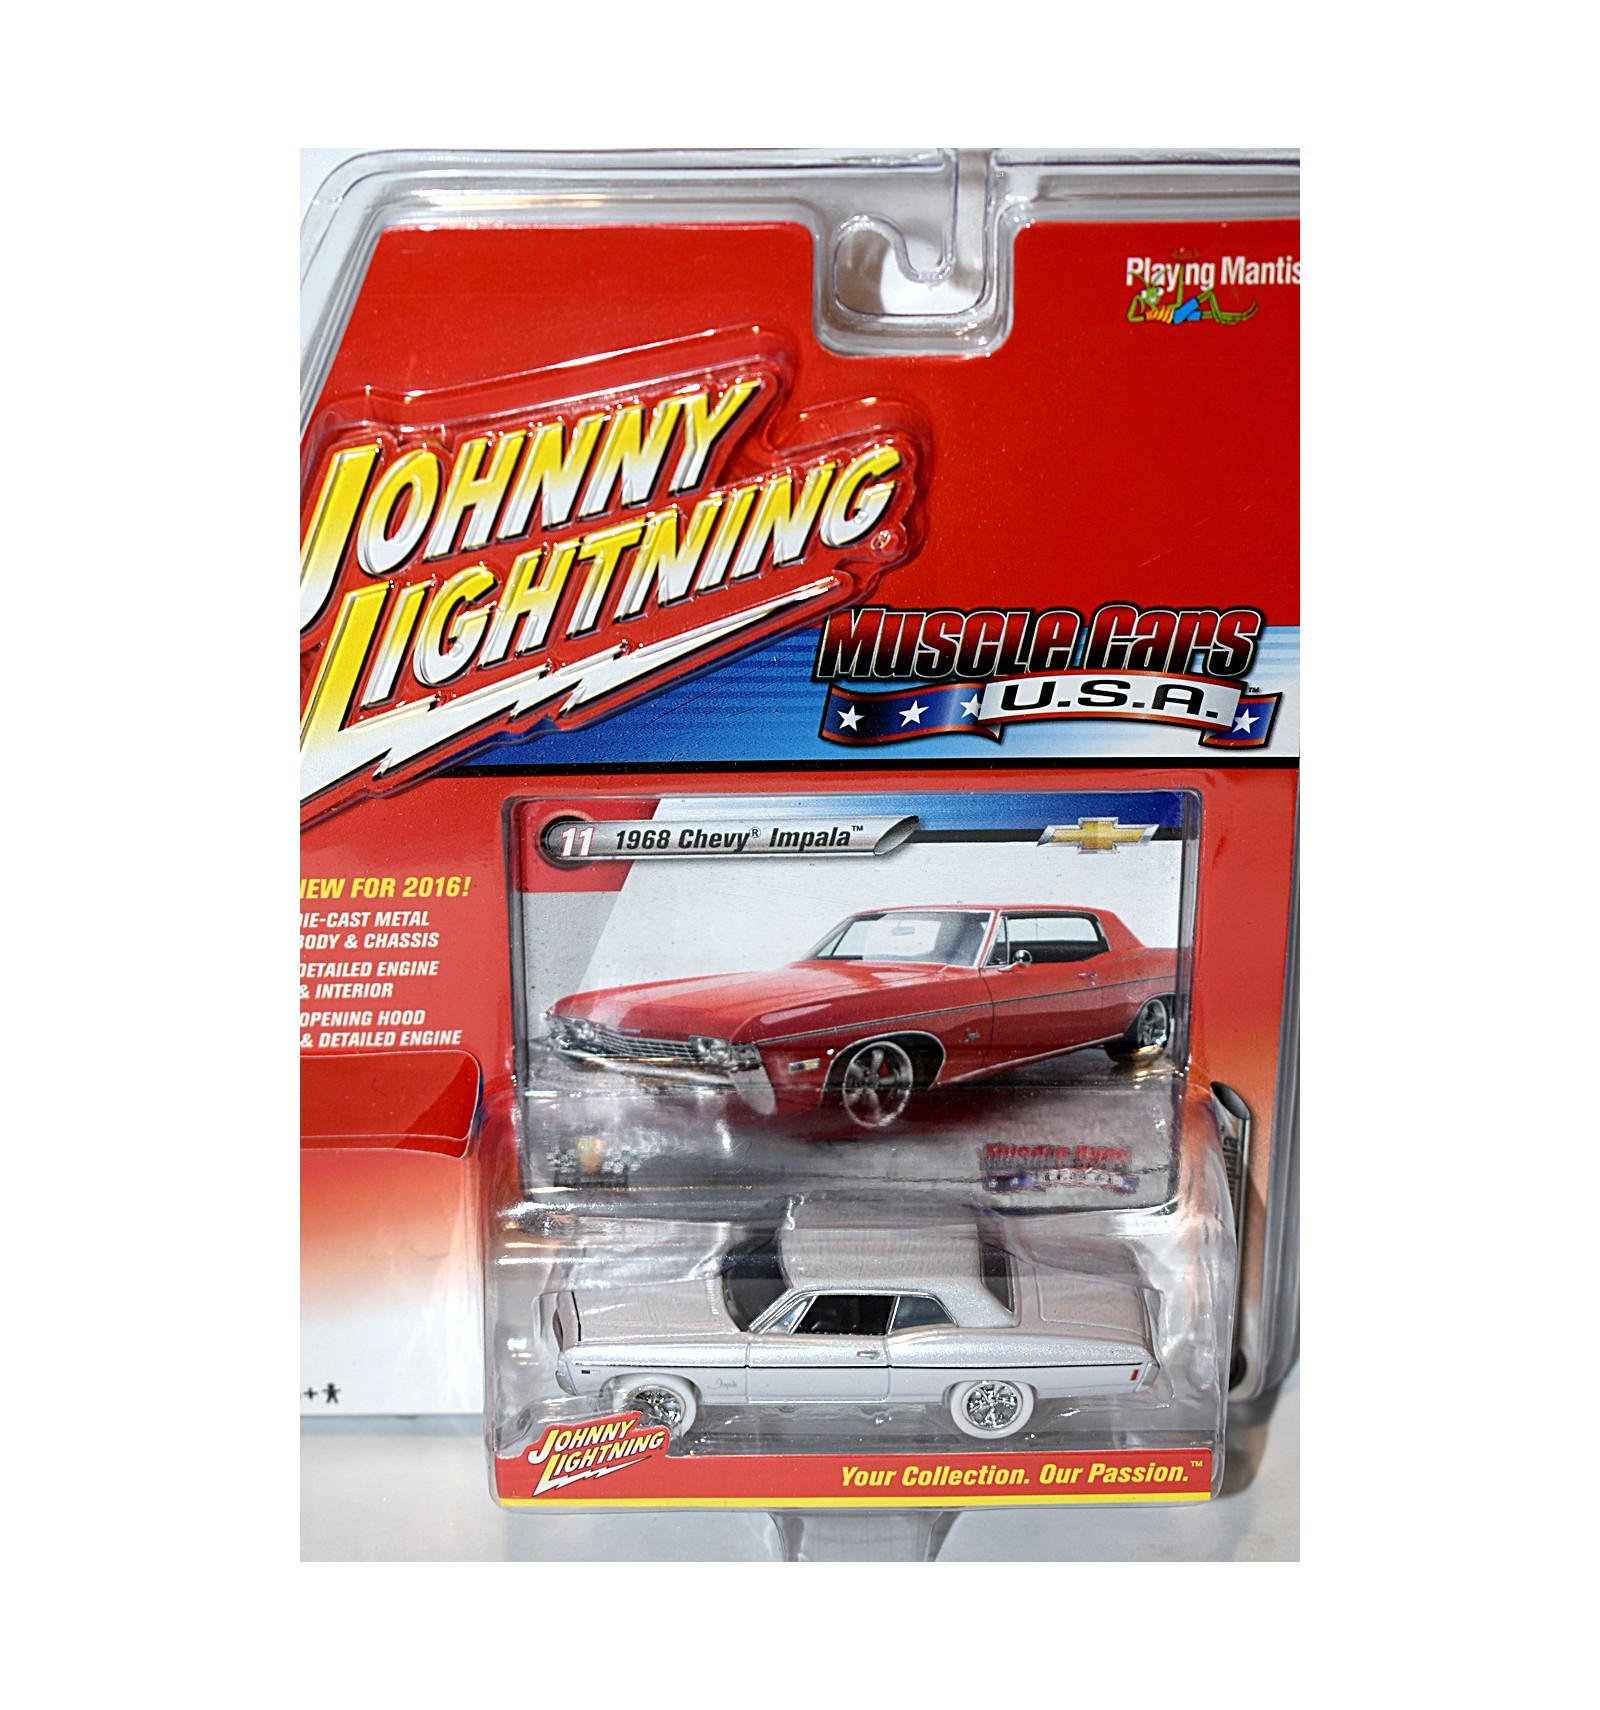 Most Valuable Johnny Lightning Cars